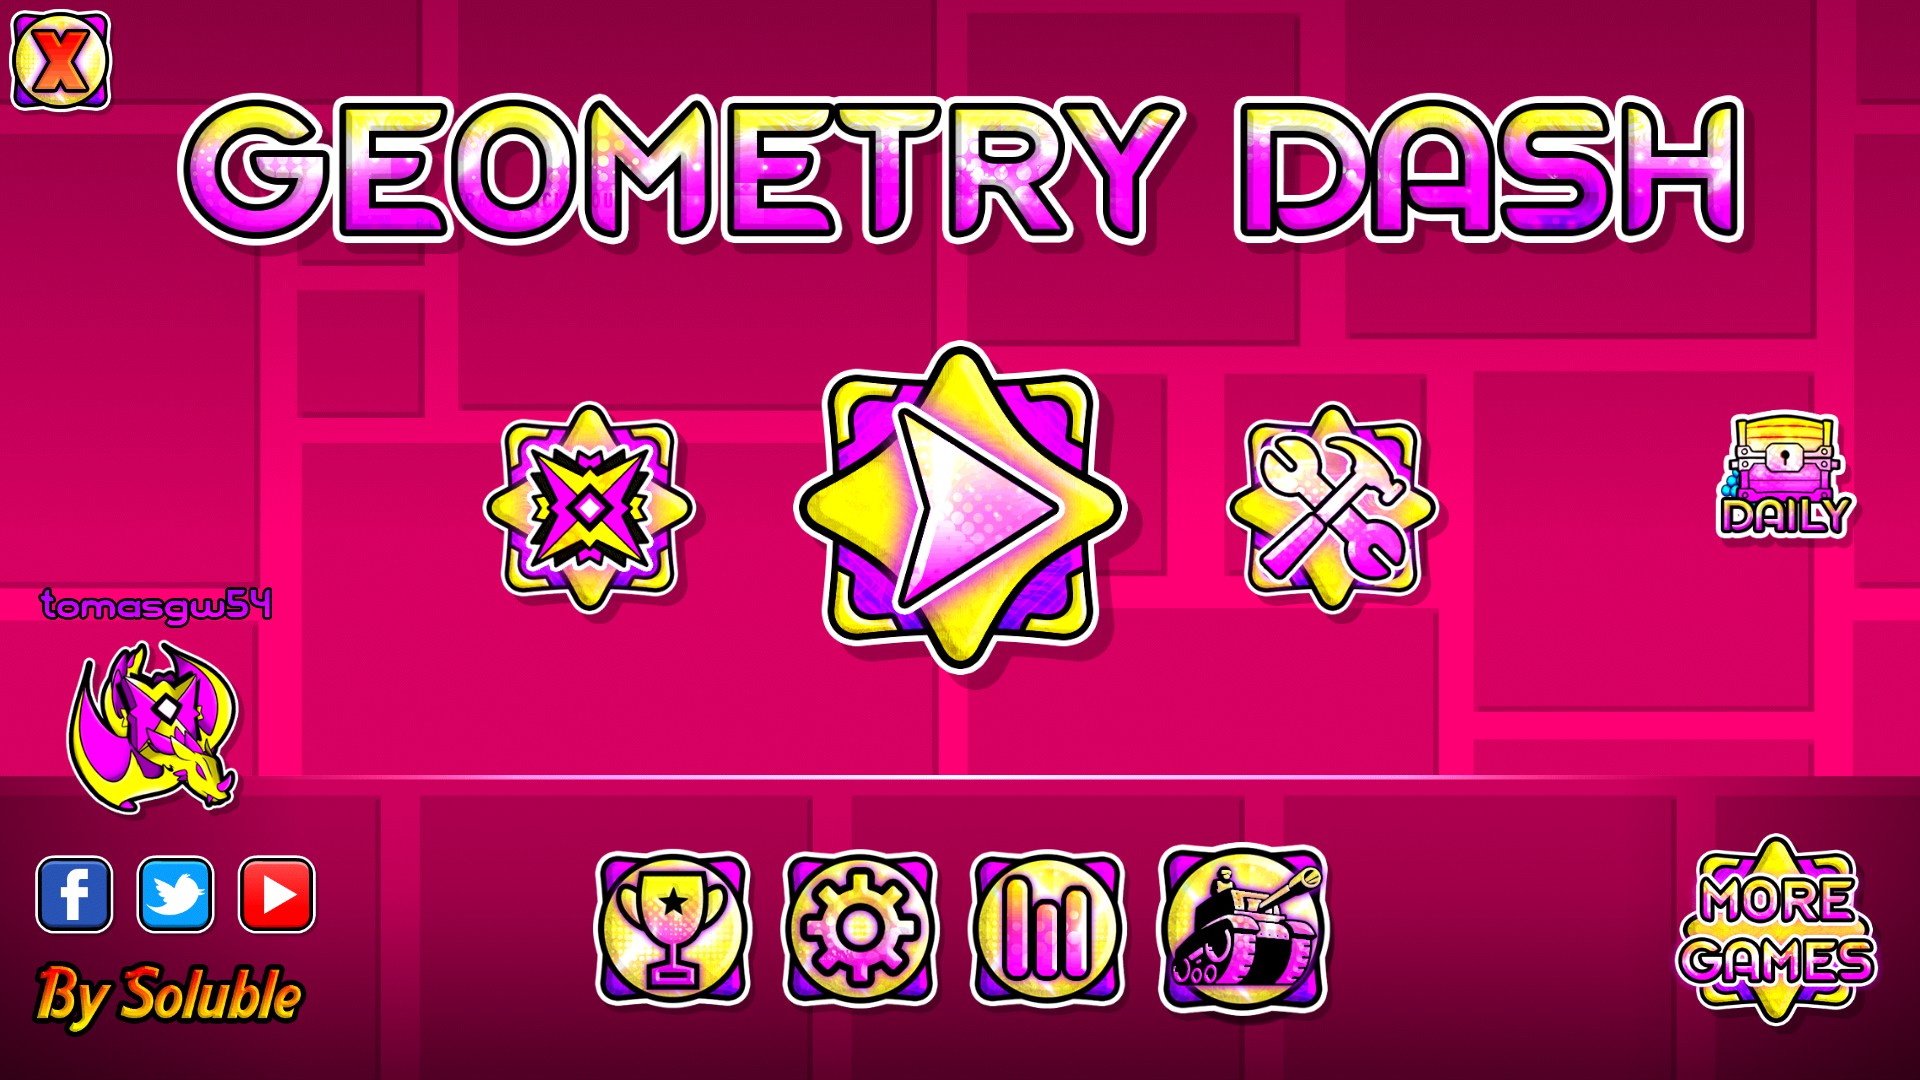 How to IMPROVE at Geometry Dash image 38